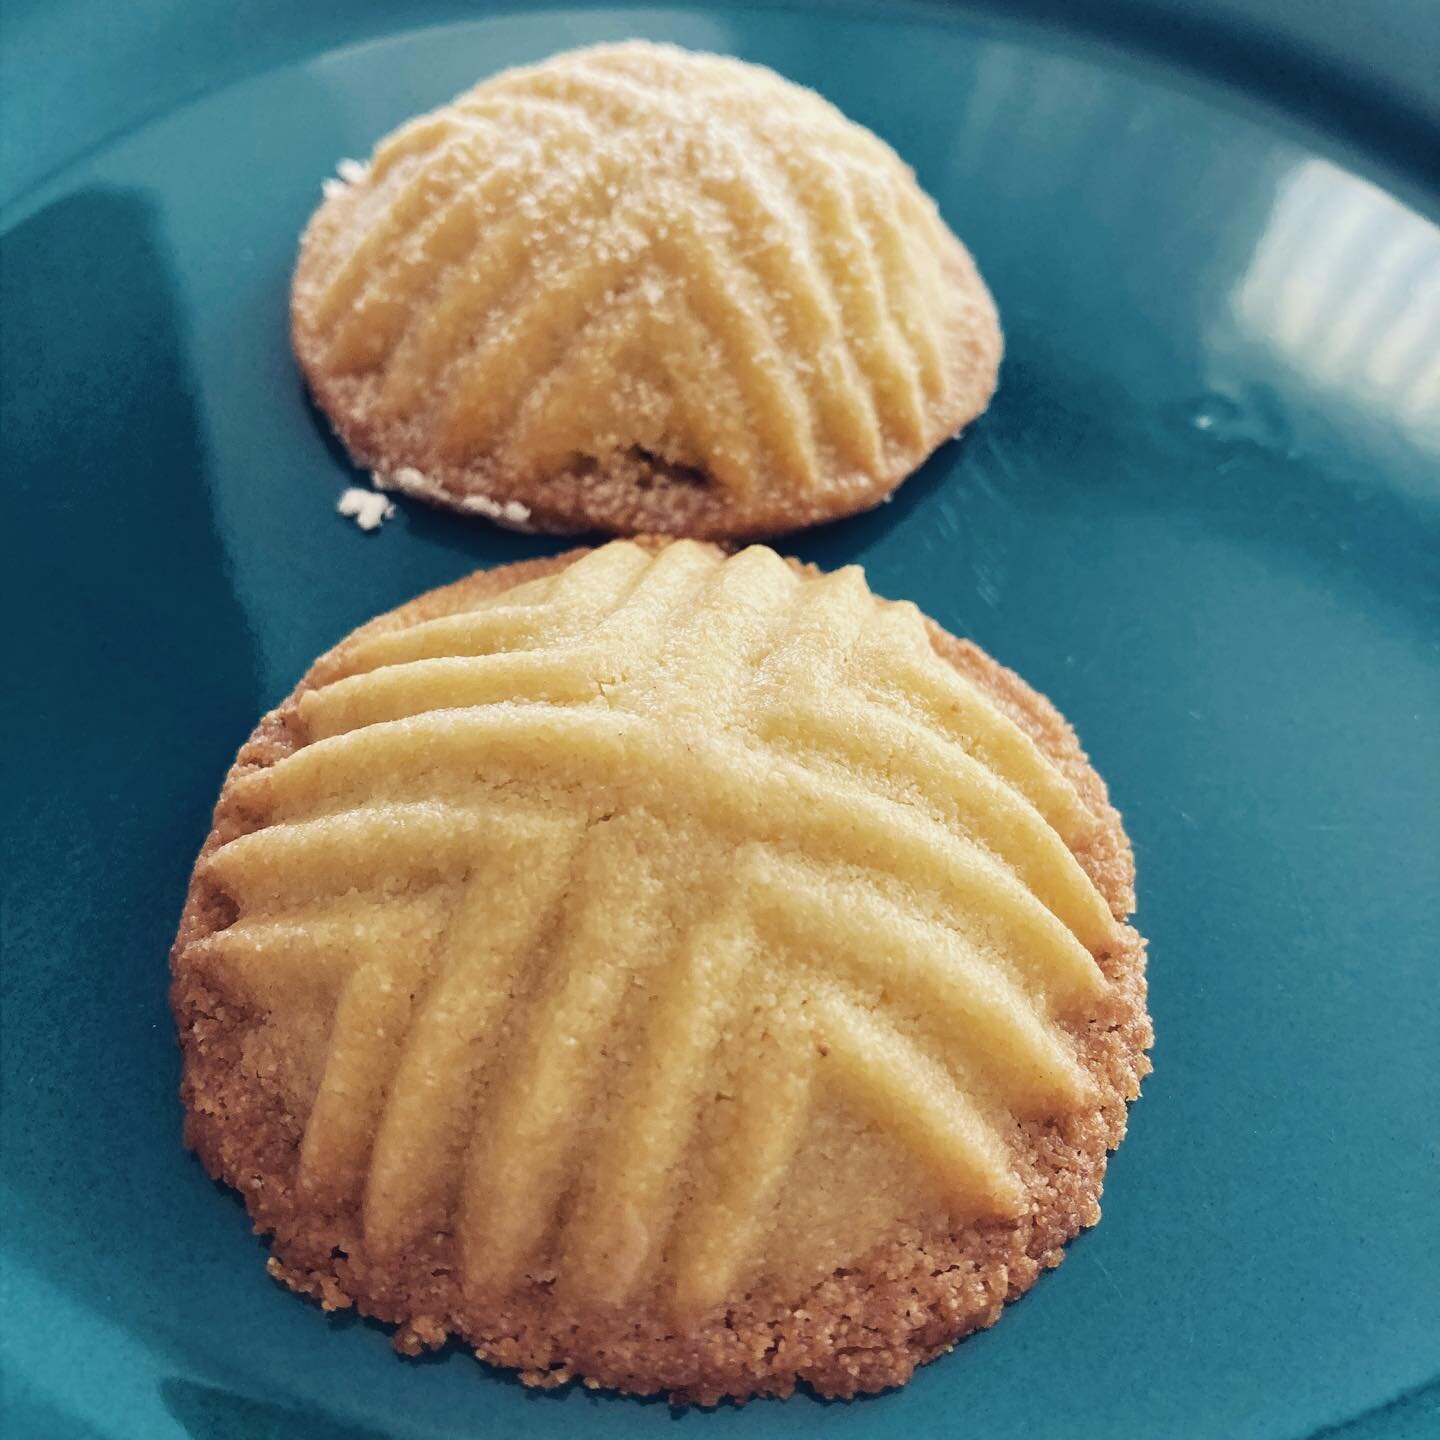 Delicate, pistachio-filled shortbread cookies with a dusting of powdered sugar- these cookies are called Maamoul and they just melt in your mouth. Adding them to the rotating menu now! www.bintisbakery.com 🥰🧿 #bintis #mymgm #hampsteadliving